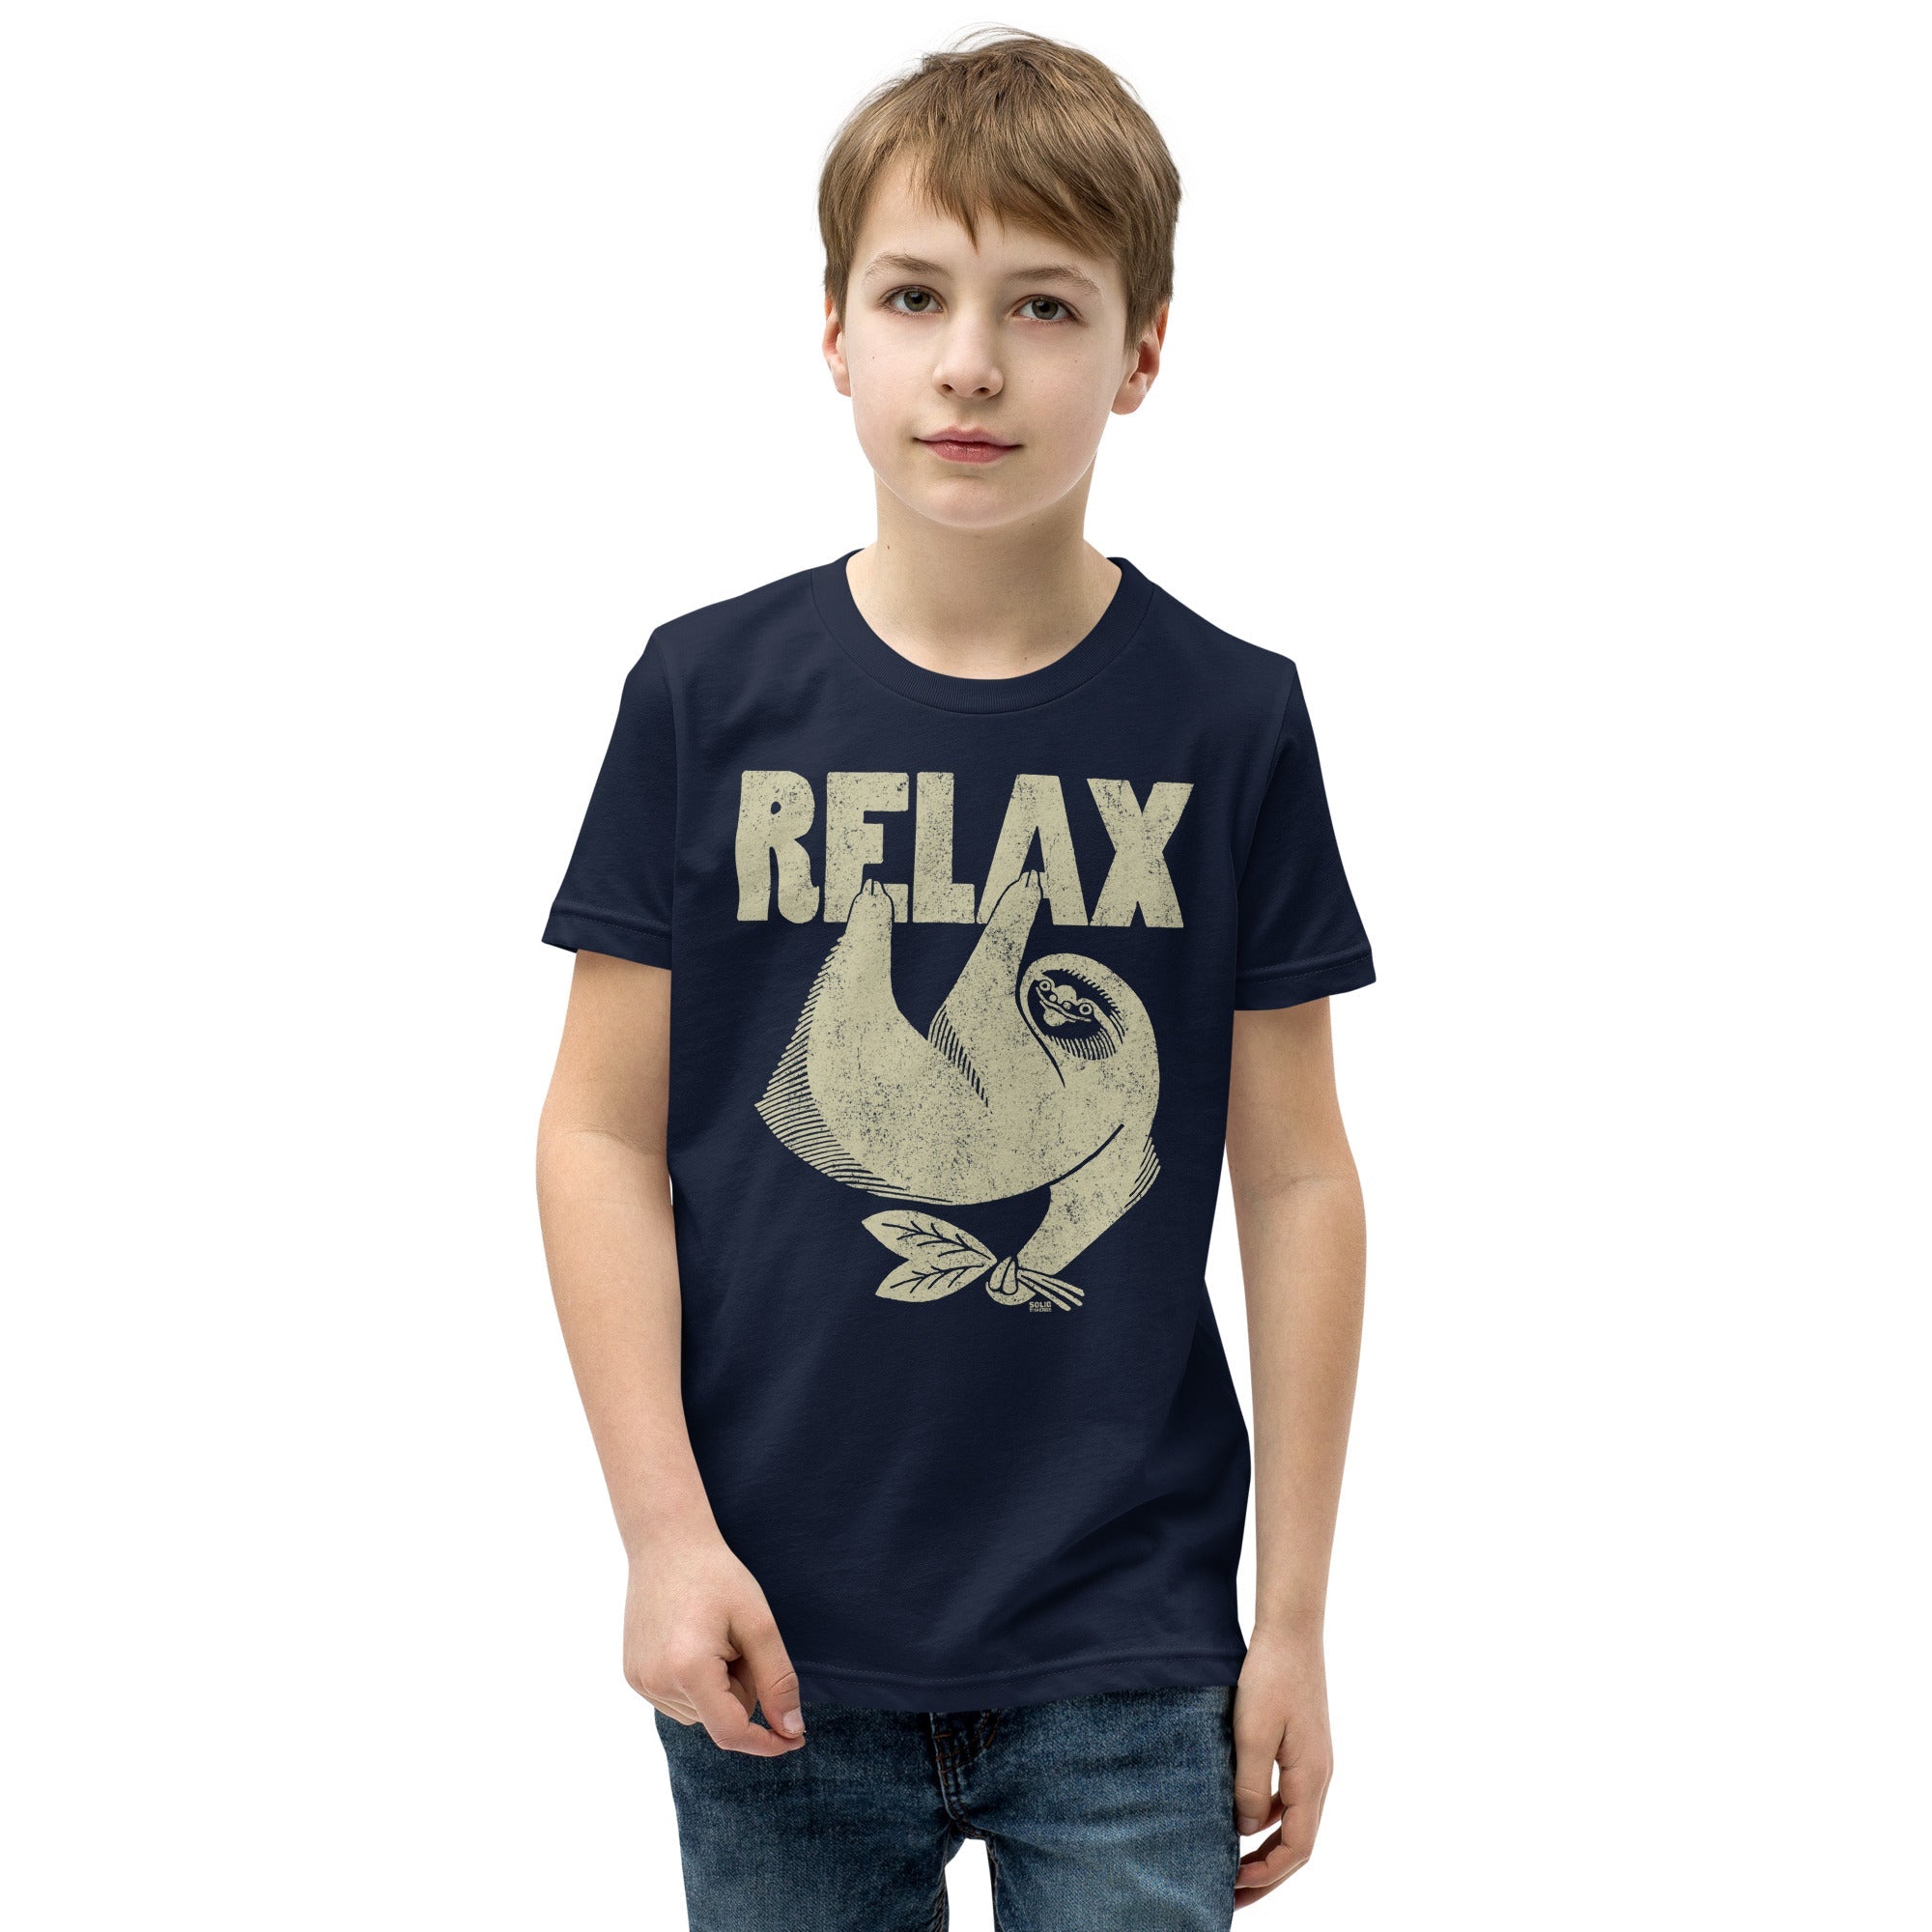 Youth Relax Retro Cute Sloth Extra Soft T-Shirt | Funny Animal Kids Tee | Solid Threads